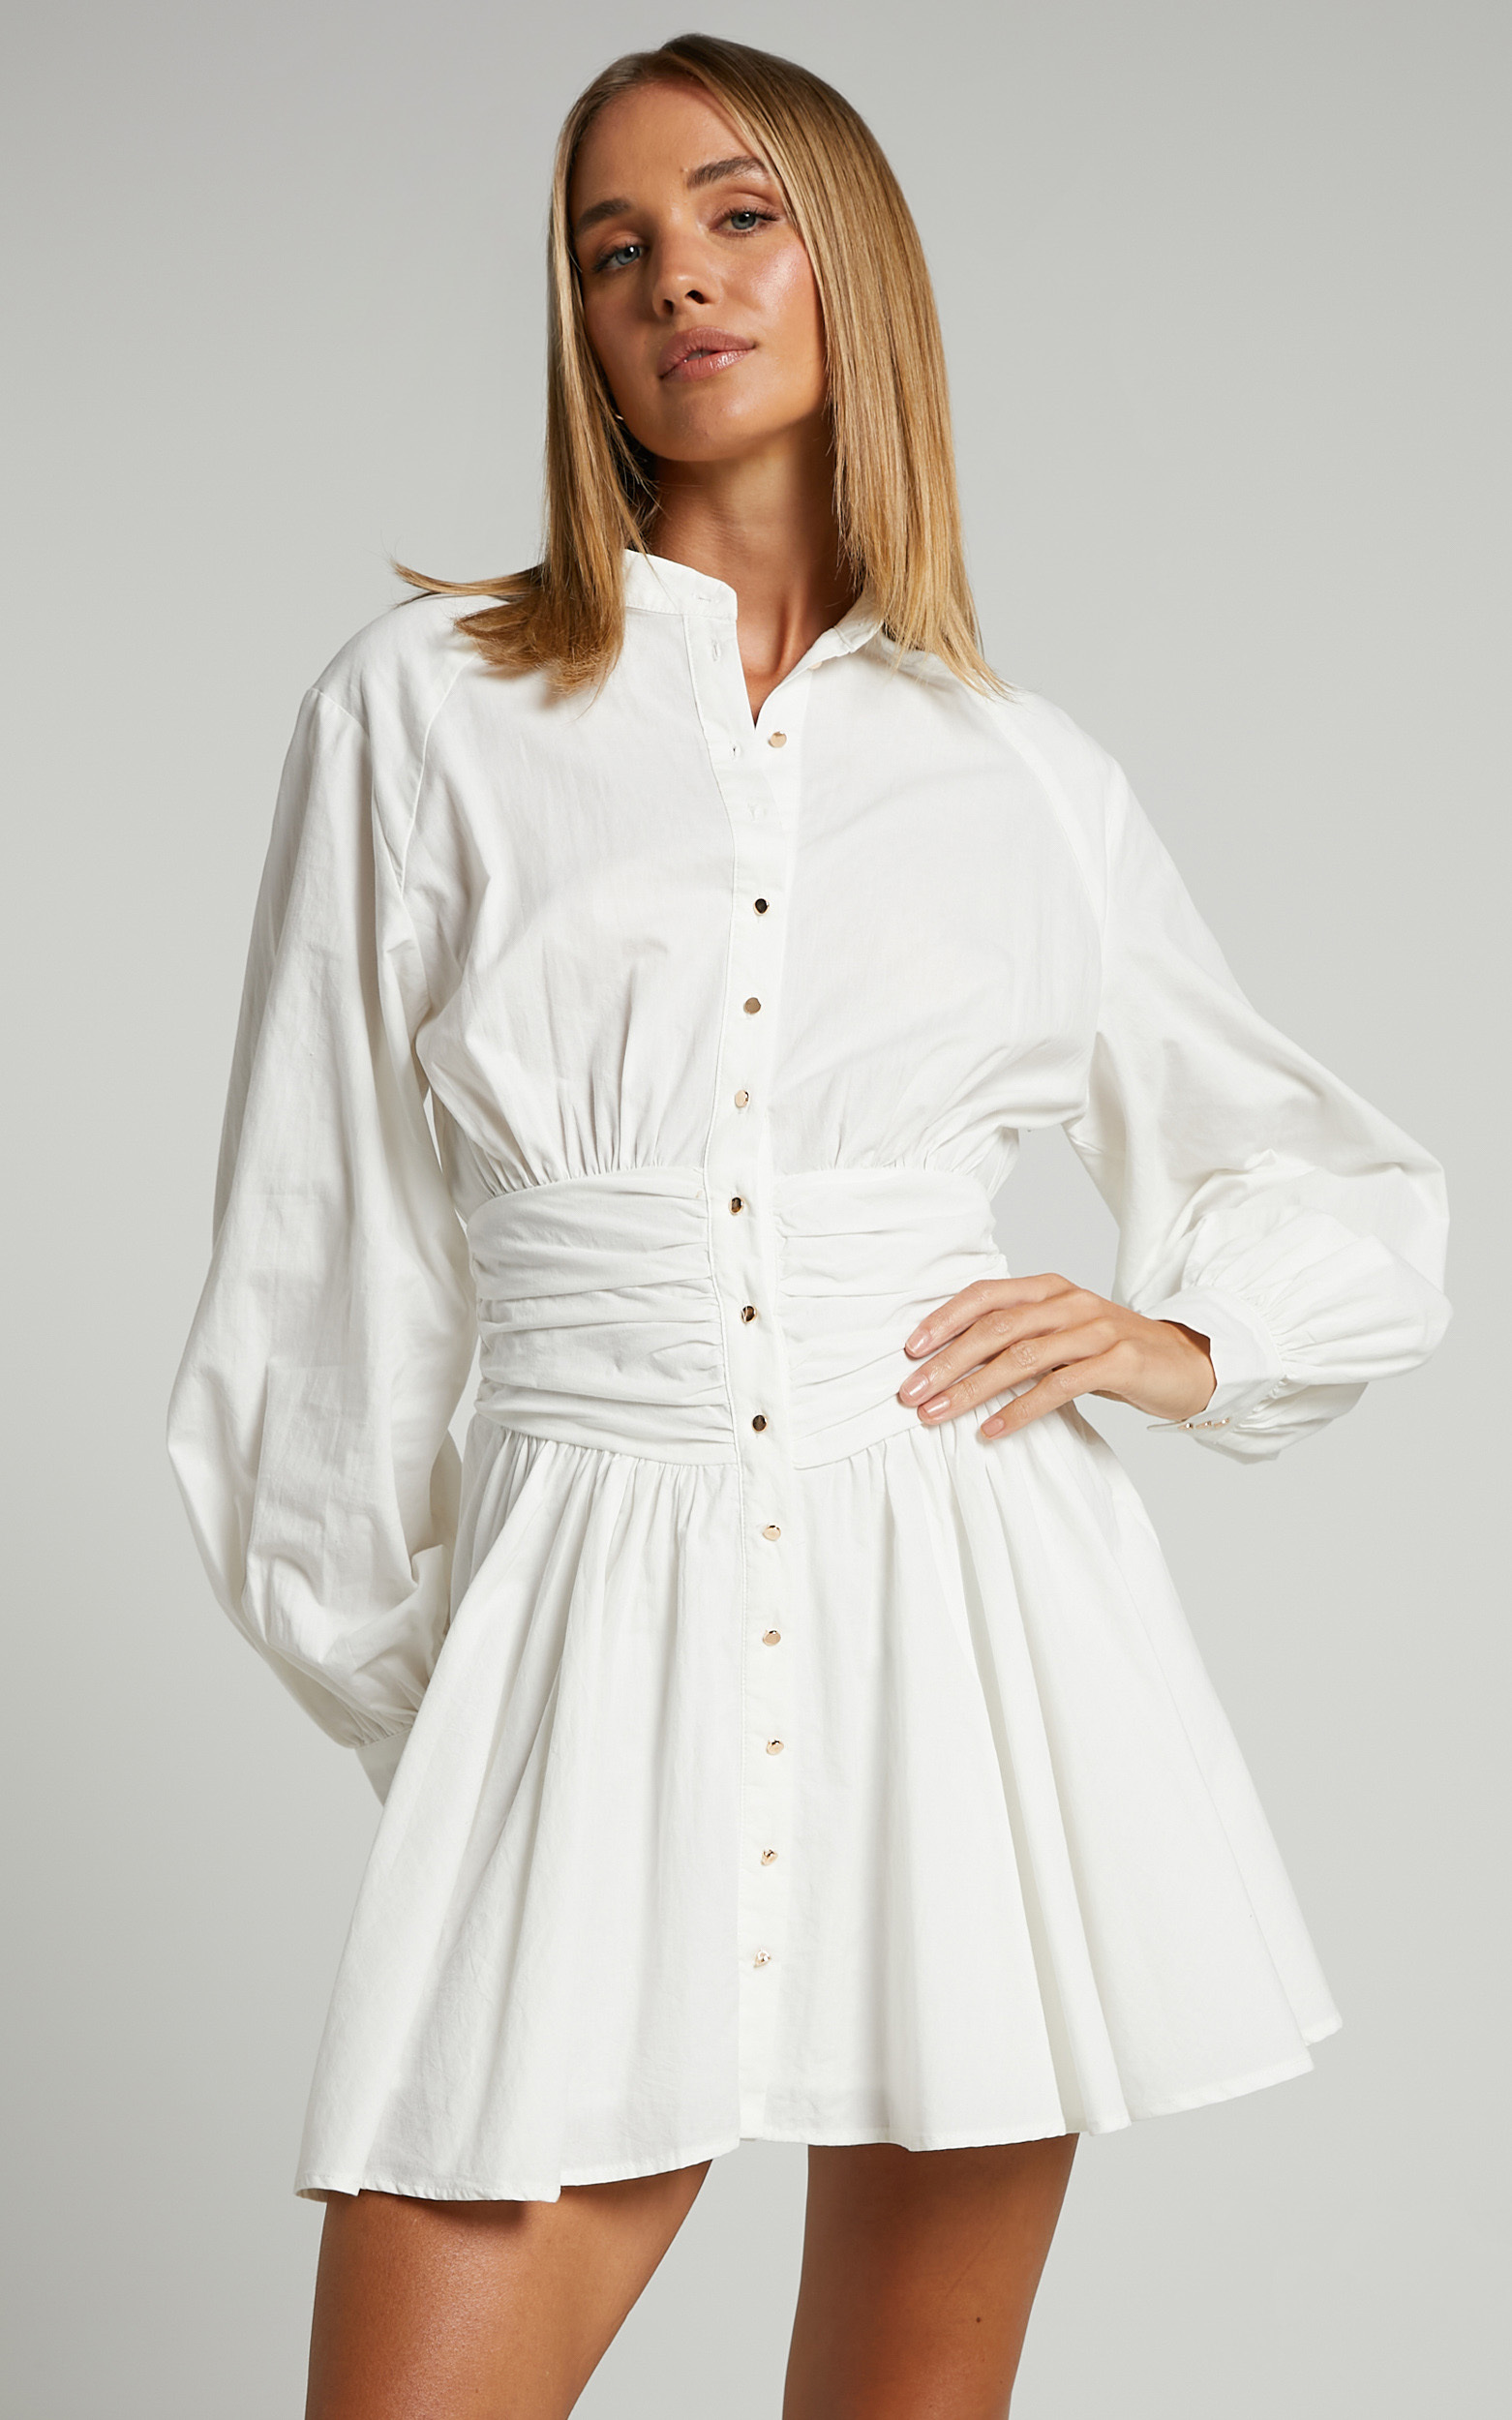 Cazie Mini Dress - Long Sleeve Gathered Waist Button Down Shirt Dress in White - 06, WHT1, hi-res image number null